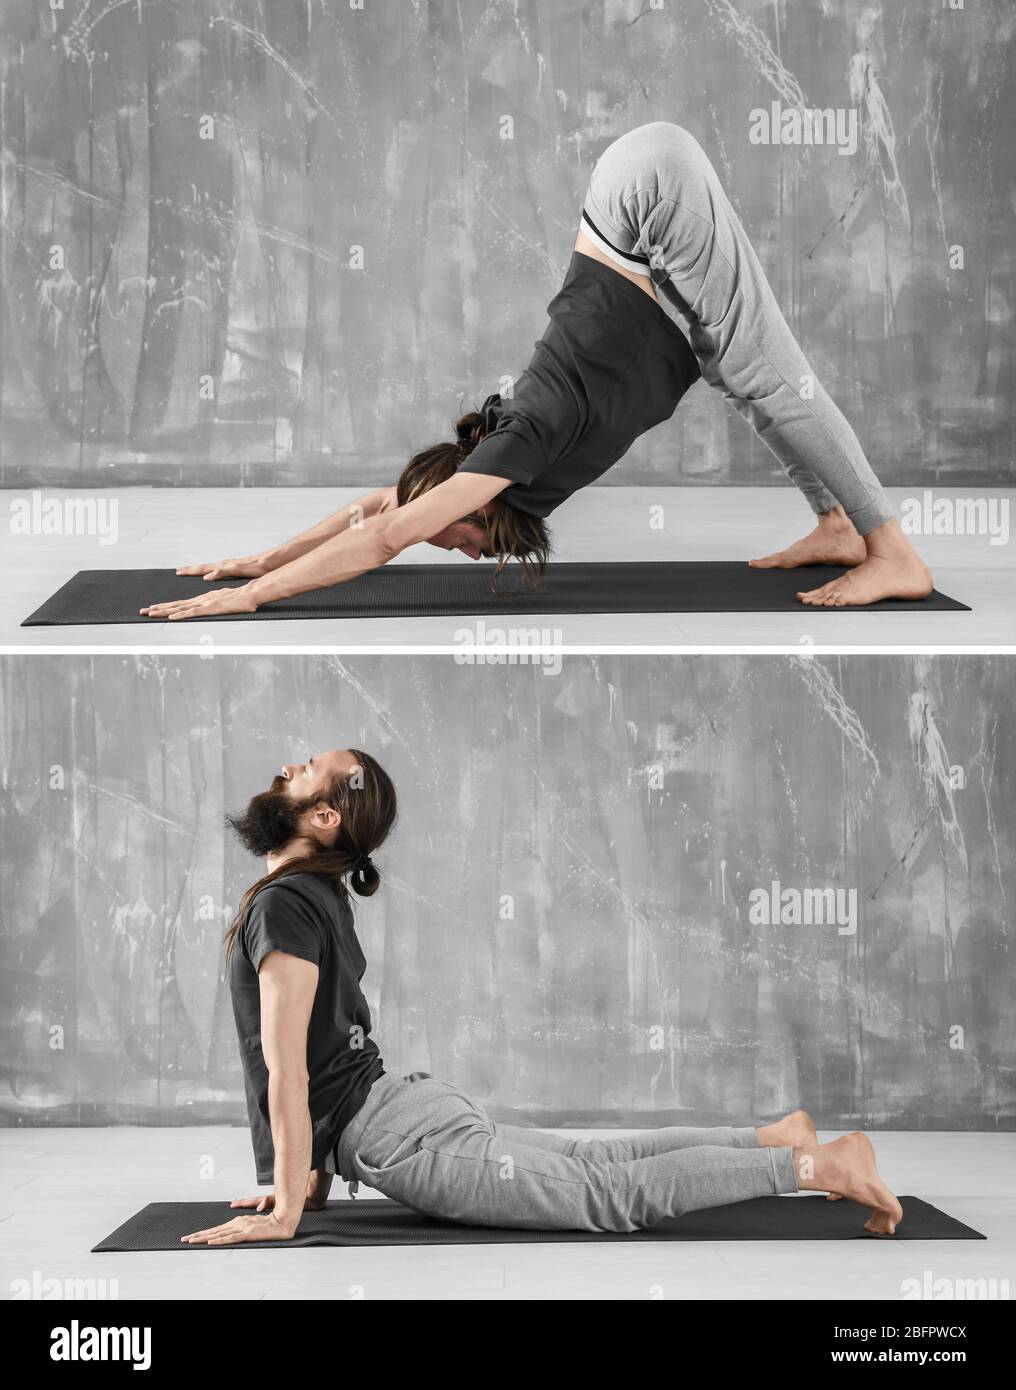 Collage of man doing different yoga poses on grunge wall